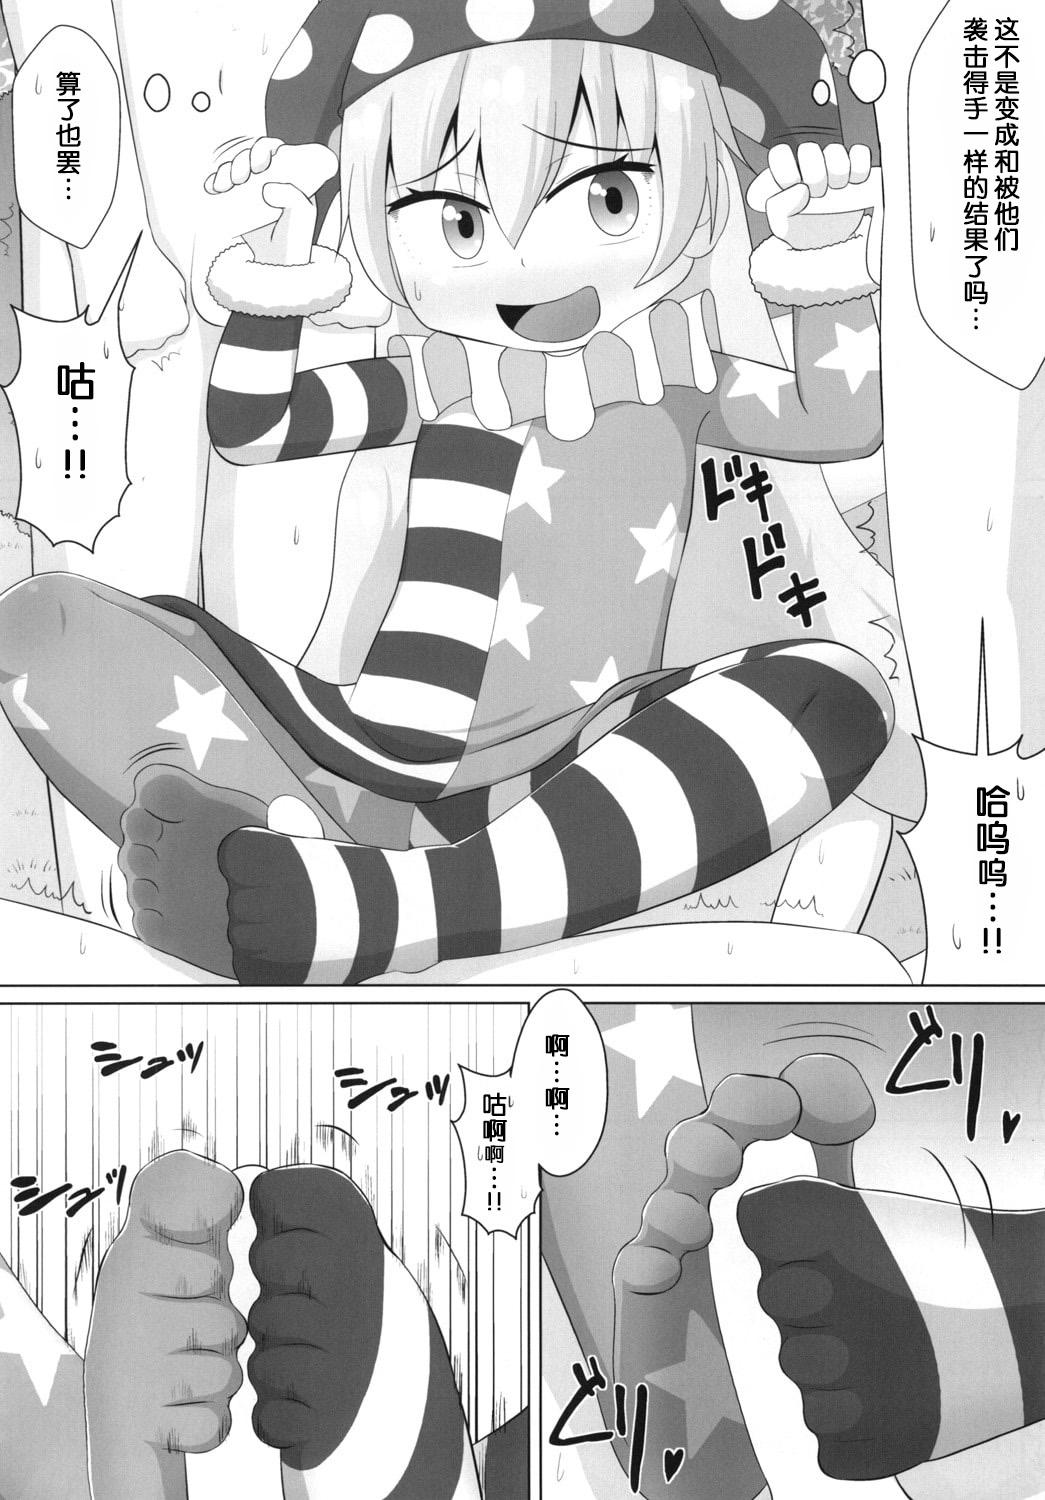 Boobies Yousei no Itazura - Touhou project Belly - Page 9